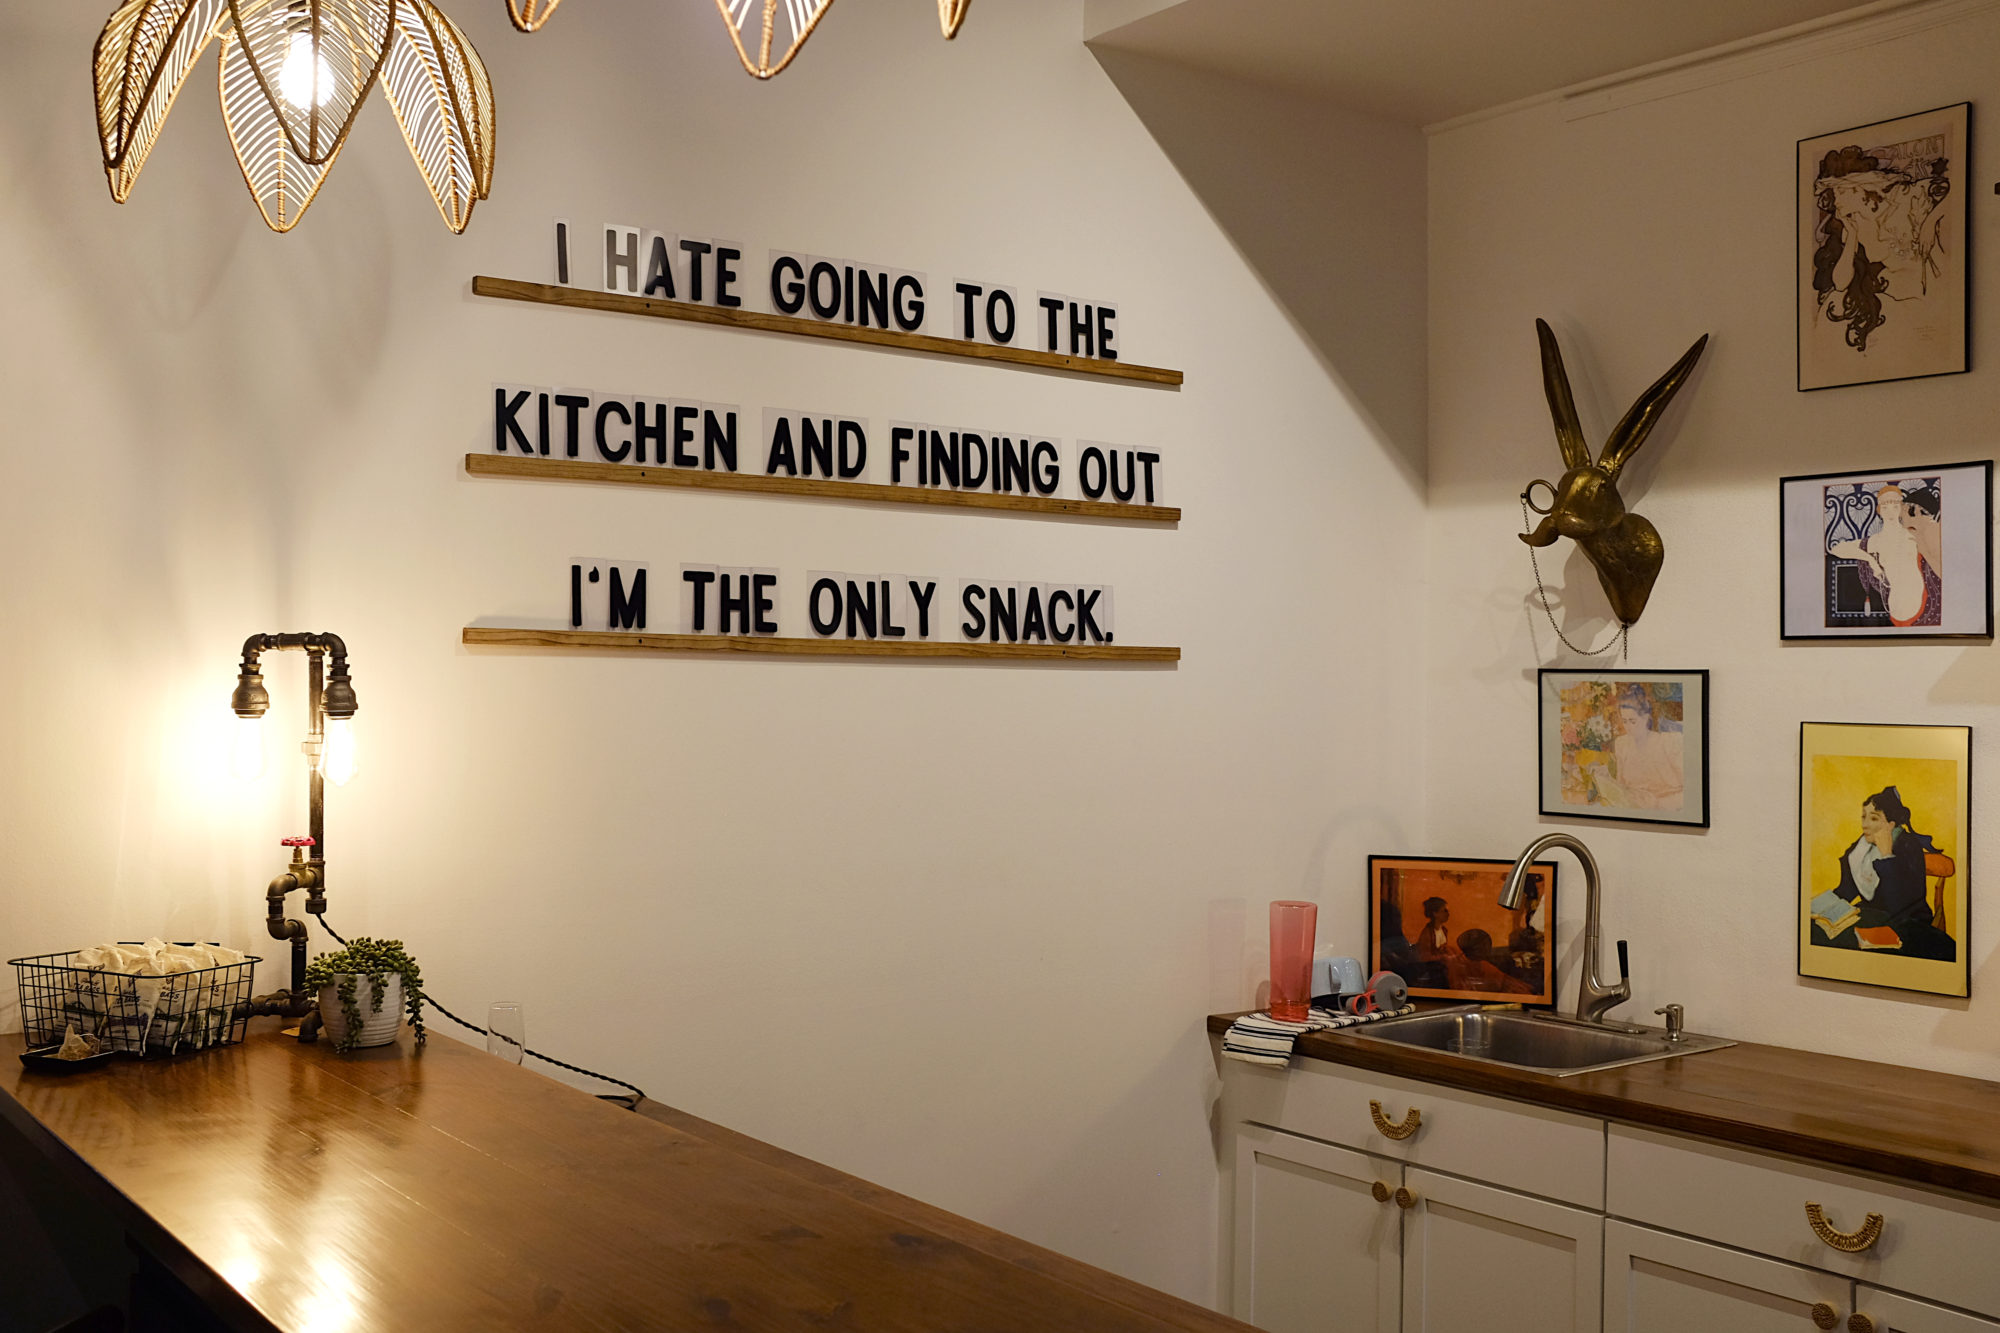 Letters on the wall that read "I hate going to the kitchen and finding out I'm the only snack"